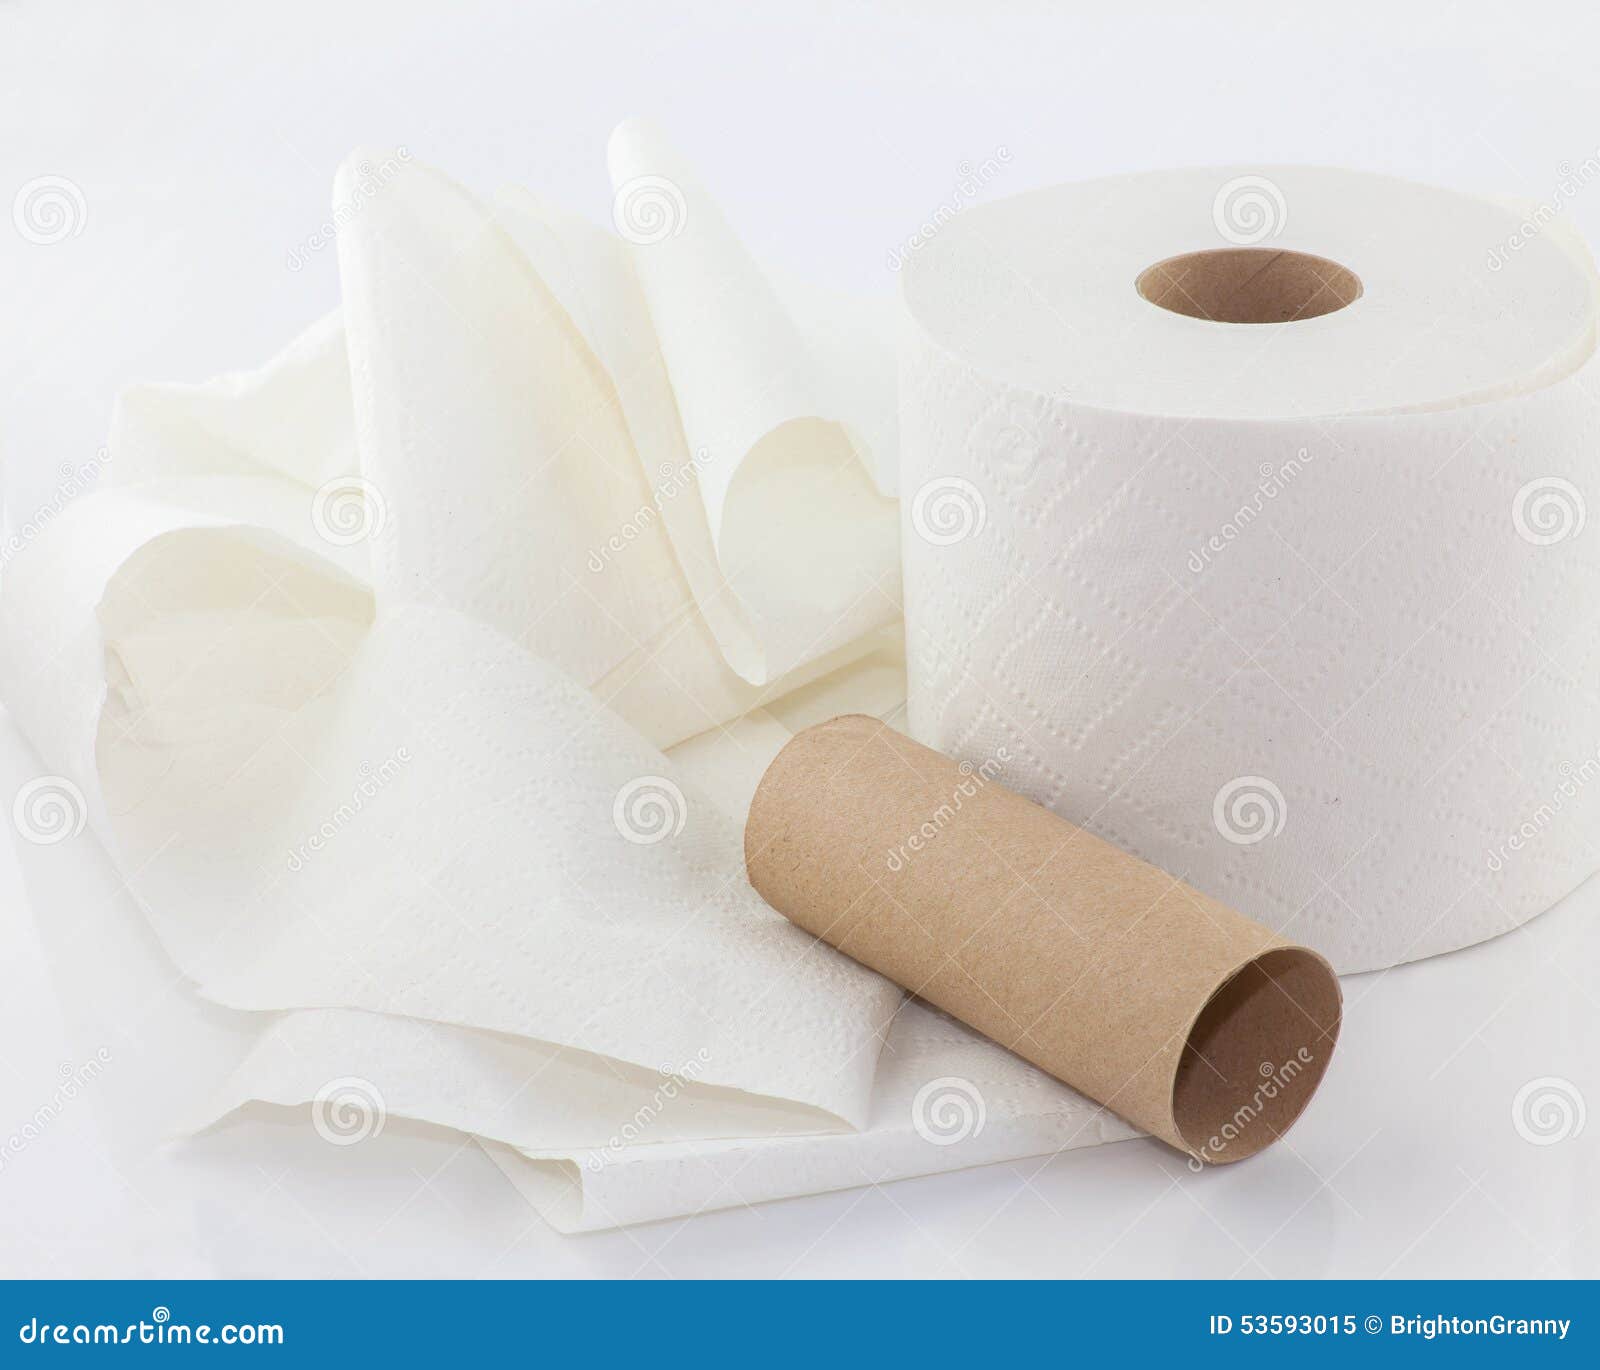 Top 100+ Images how long is a roll of toilet paper unrolled Full HD, 2k, 4k